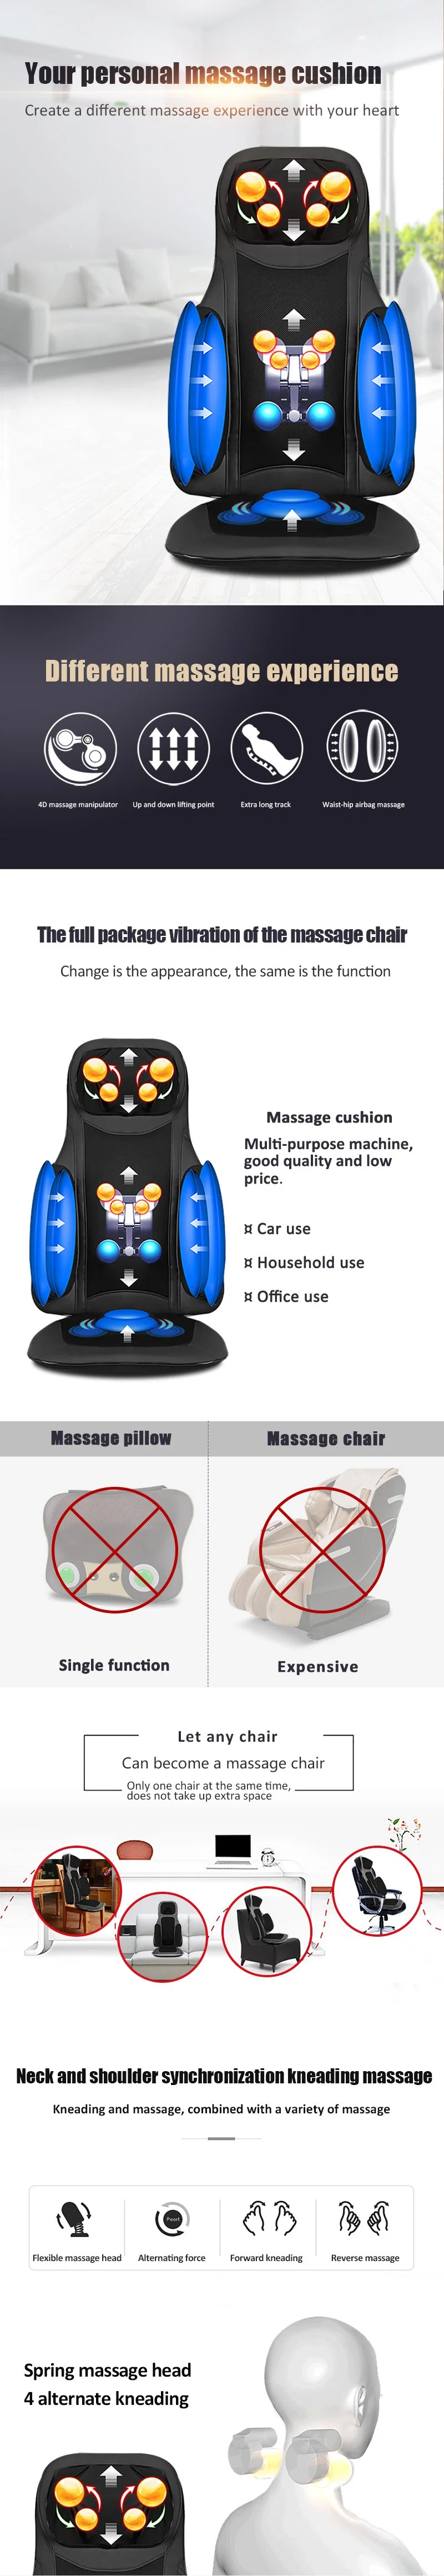 Electric Back Therapist Heated Massage Cushion Car Seat Chair Massager